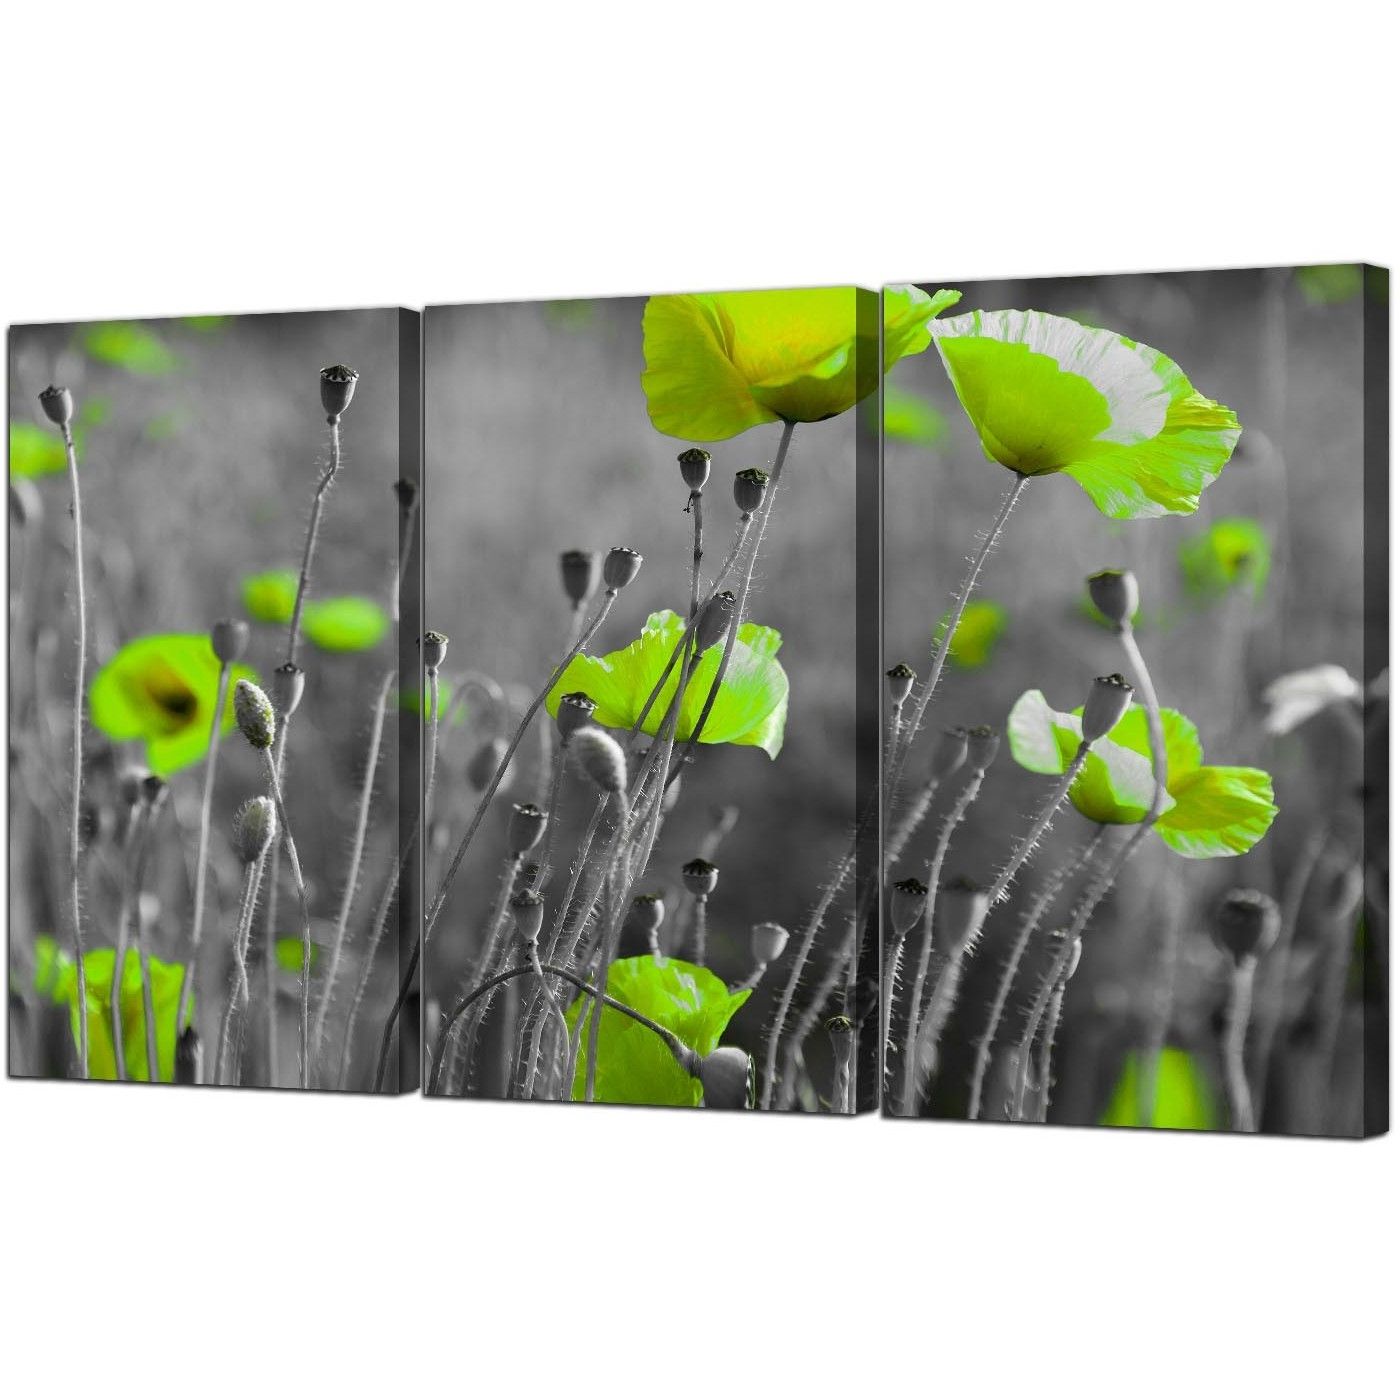 Preferred Green Poppy Canvas Wall Art 3 Part For Your Living Room (View 1 of 15)